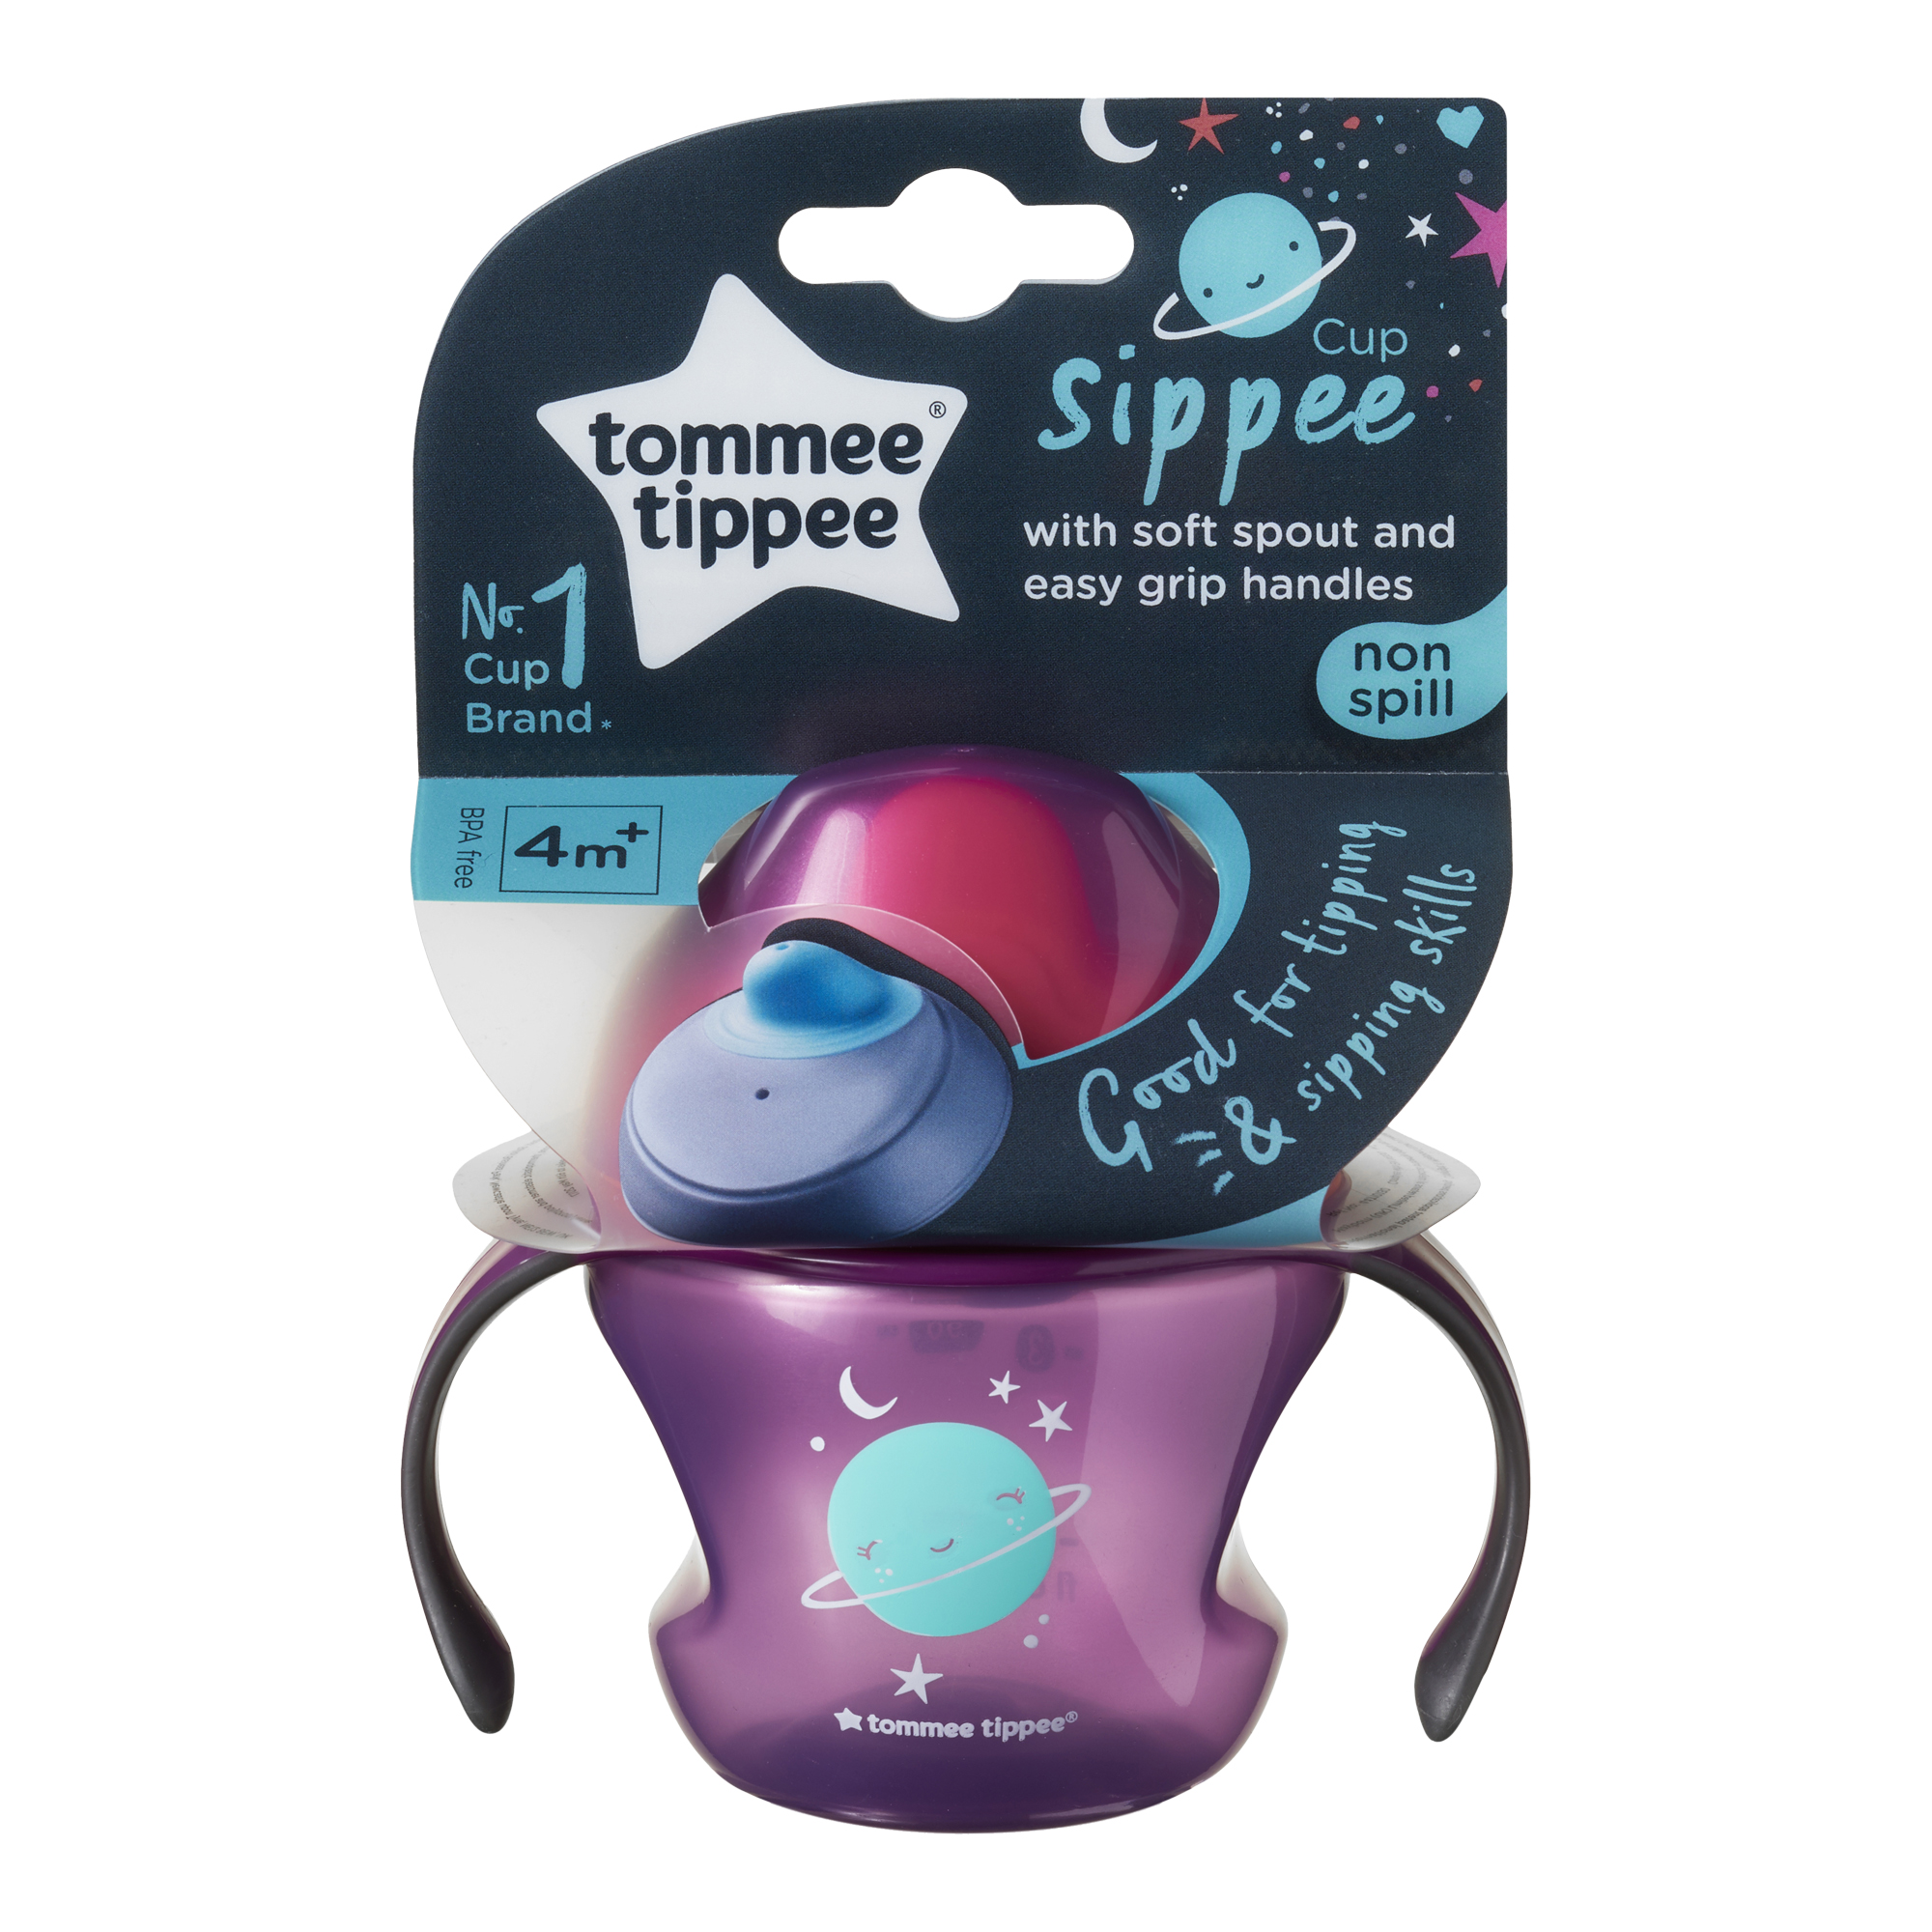 Cana Tommee Tippee First Trainer Ecomm, 150 ml, 4 luni +, Planeta mov, 1 buc